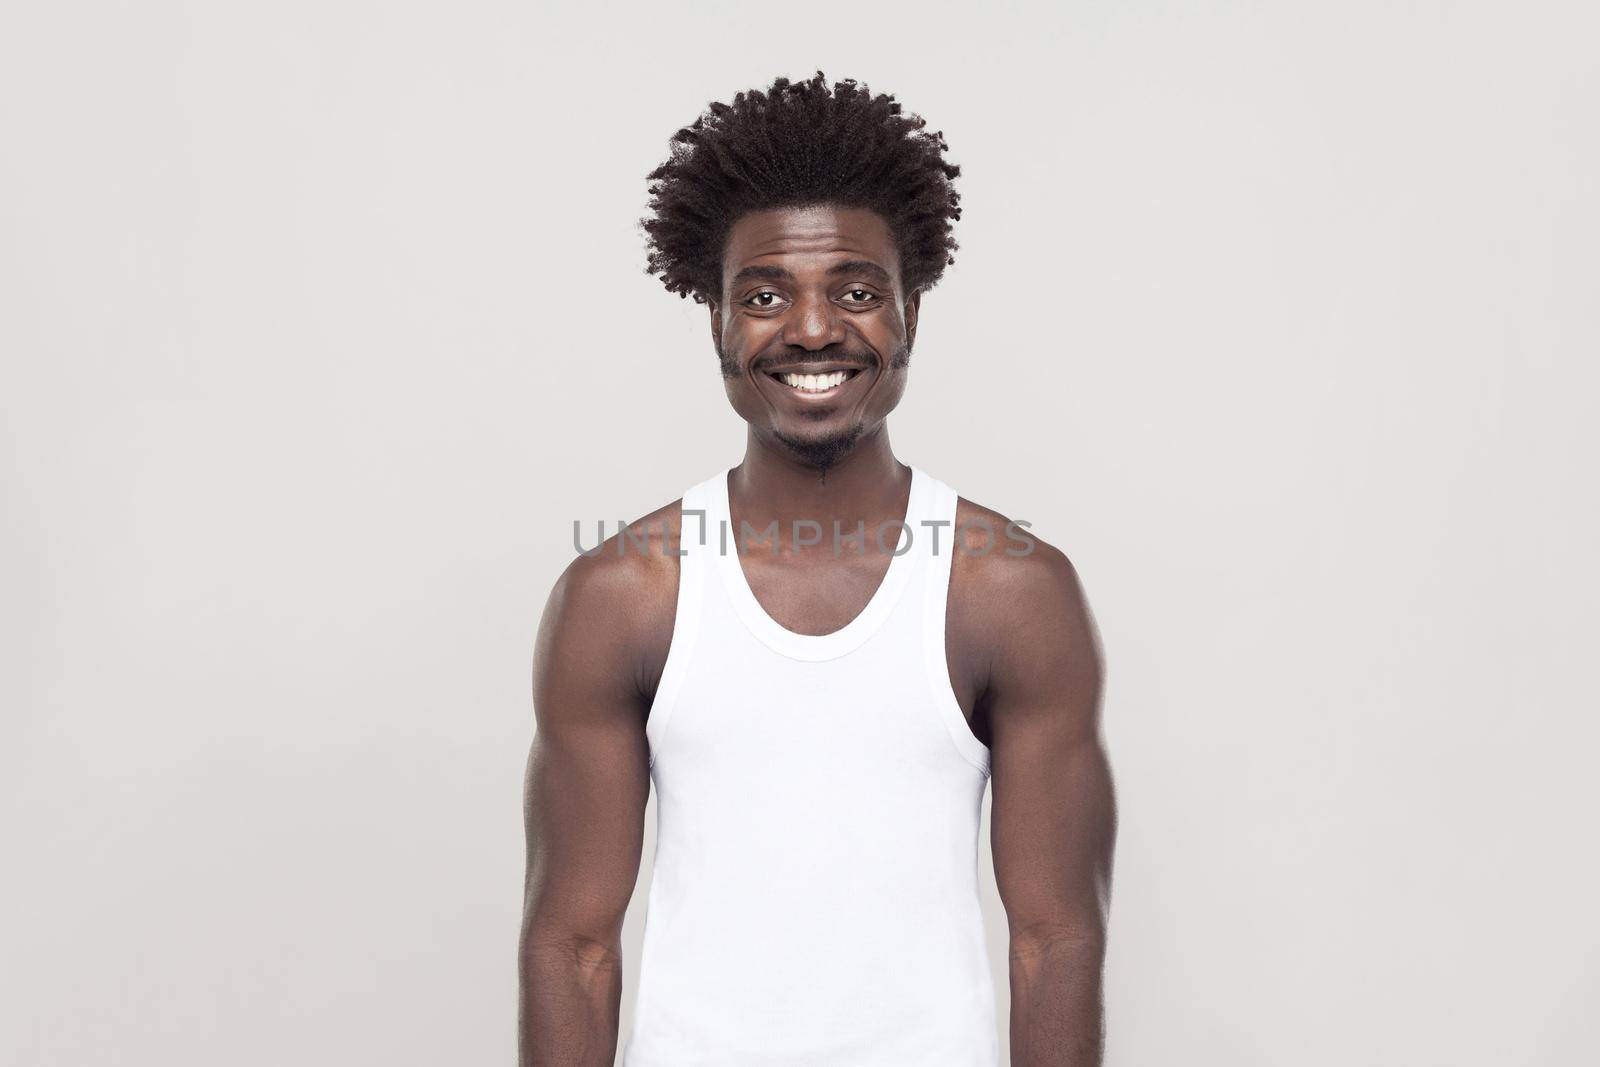 Happiness afro man looking at camera and toothy smiling. Studio shot. Gray background